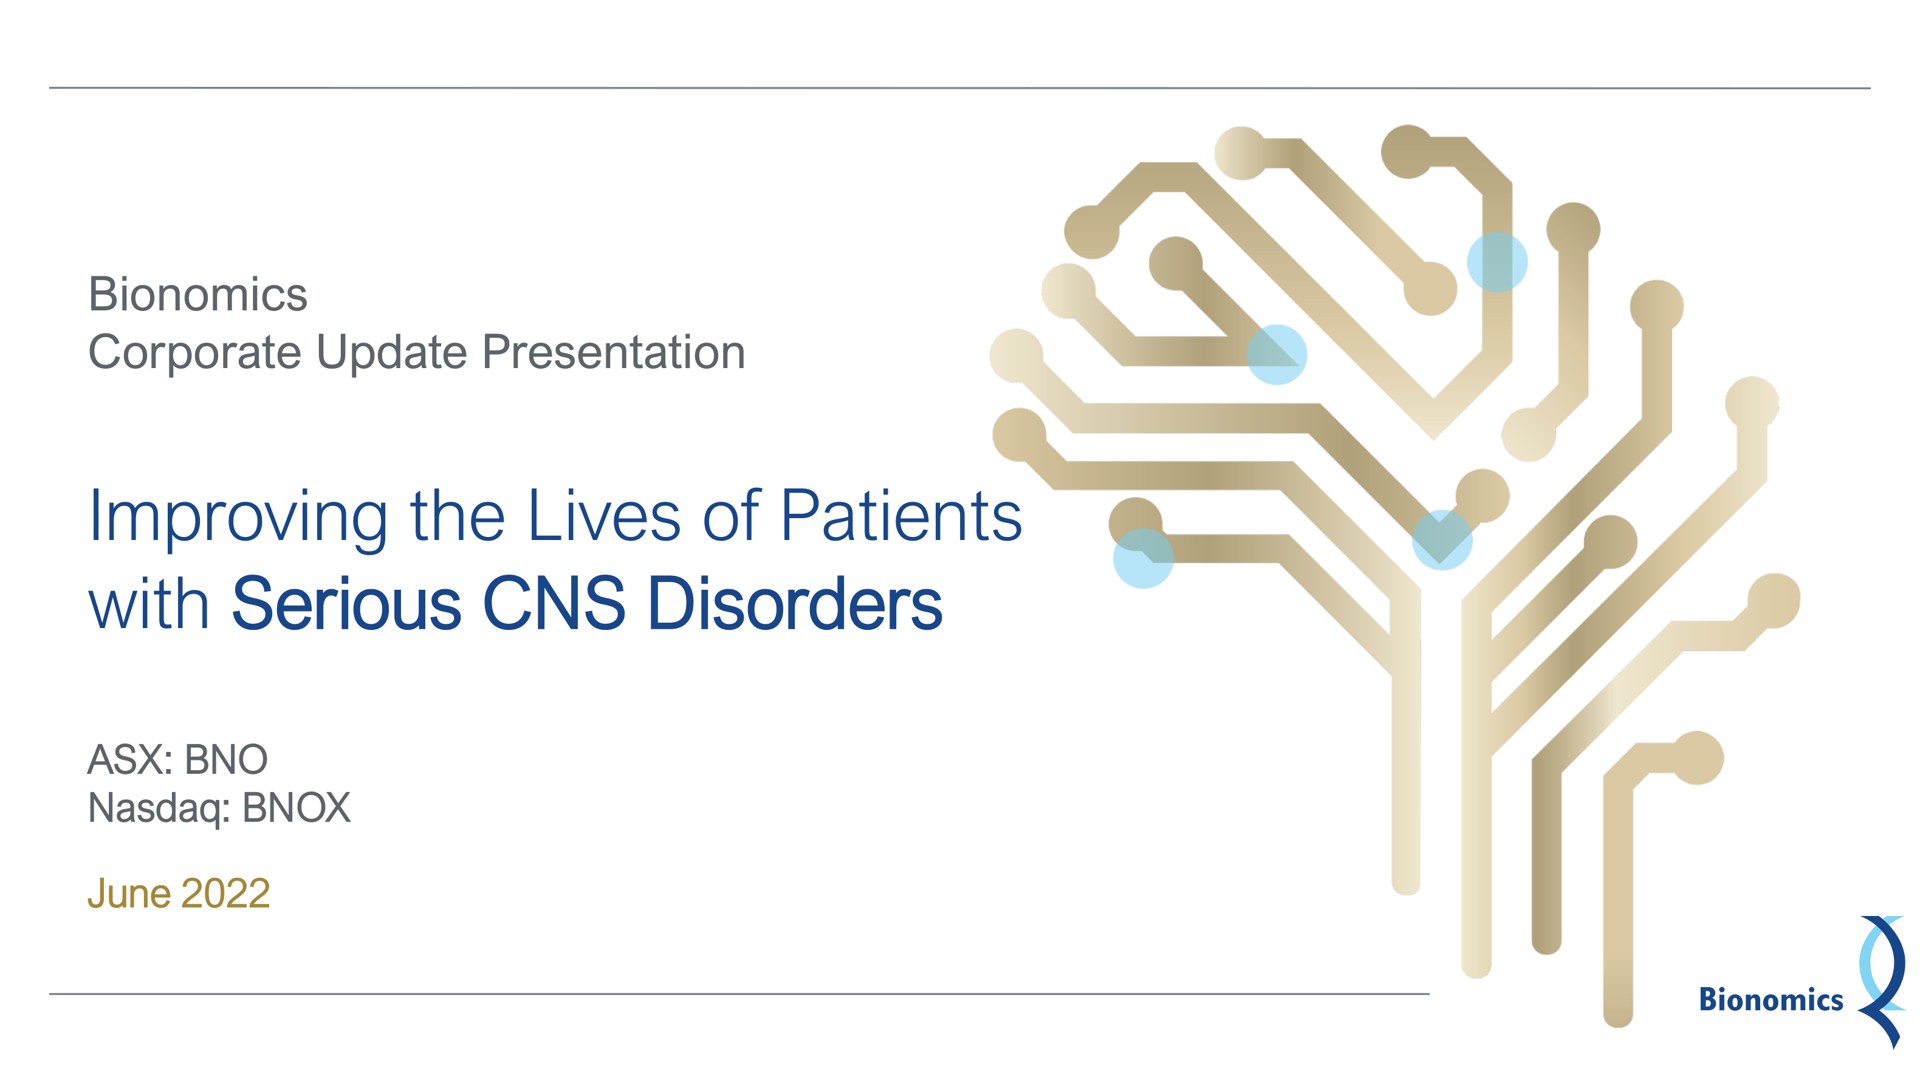 bionomics corporate update presentation improving the lives of patients with serious disorders june | Bionomics